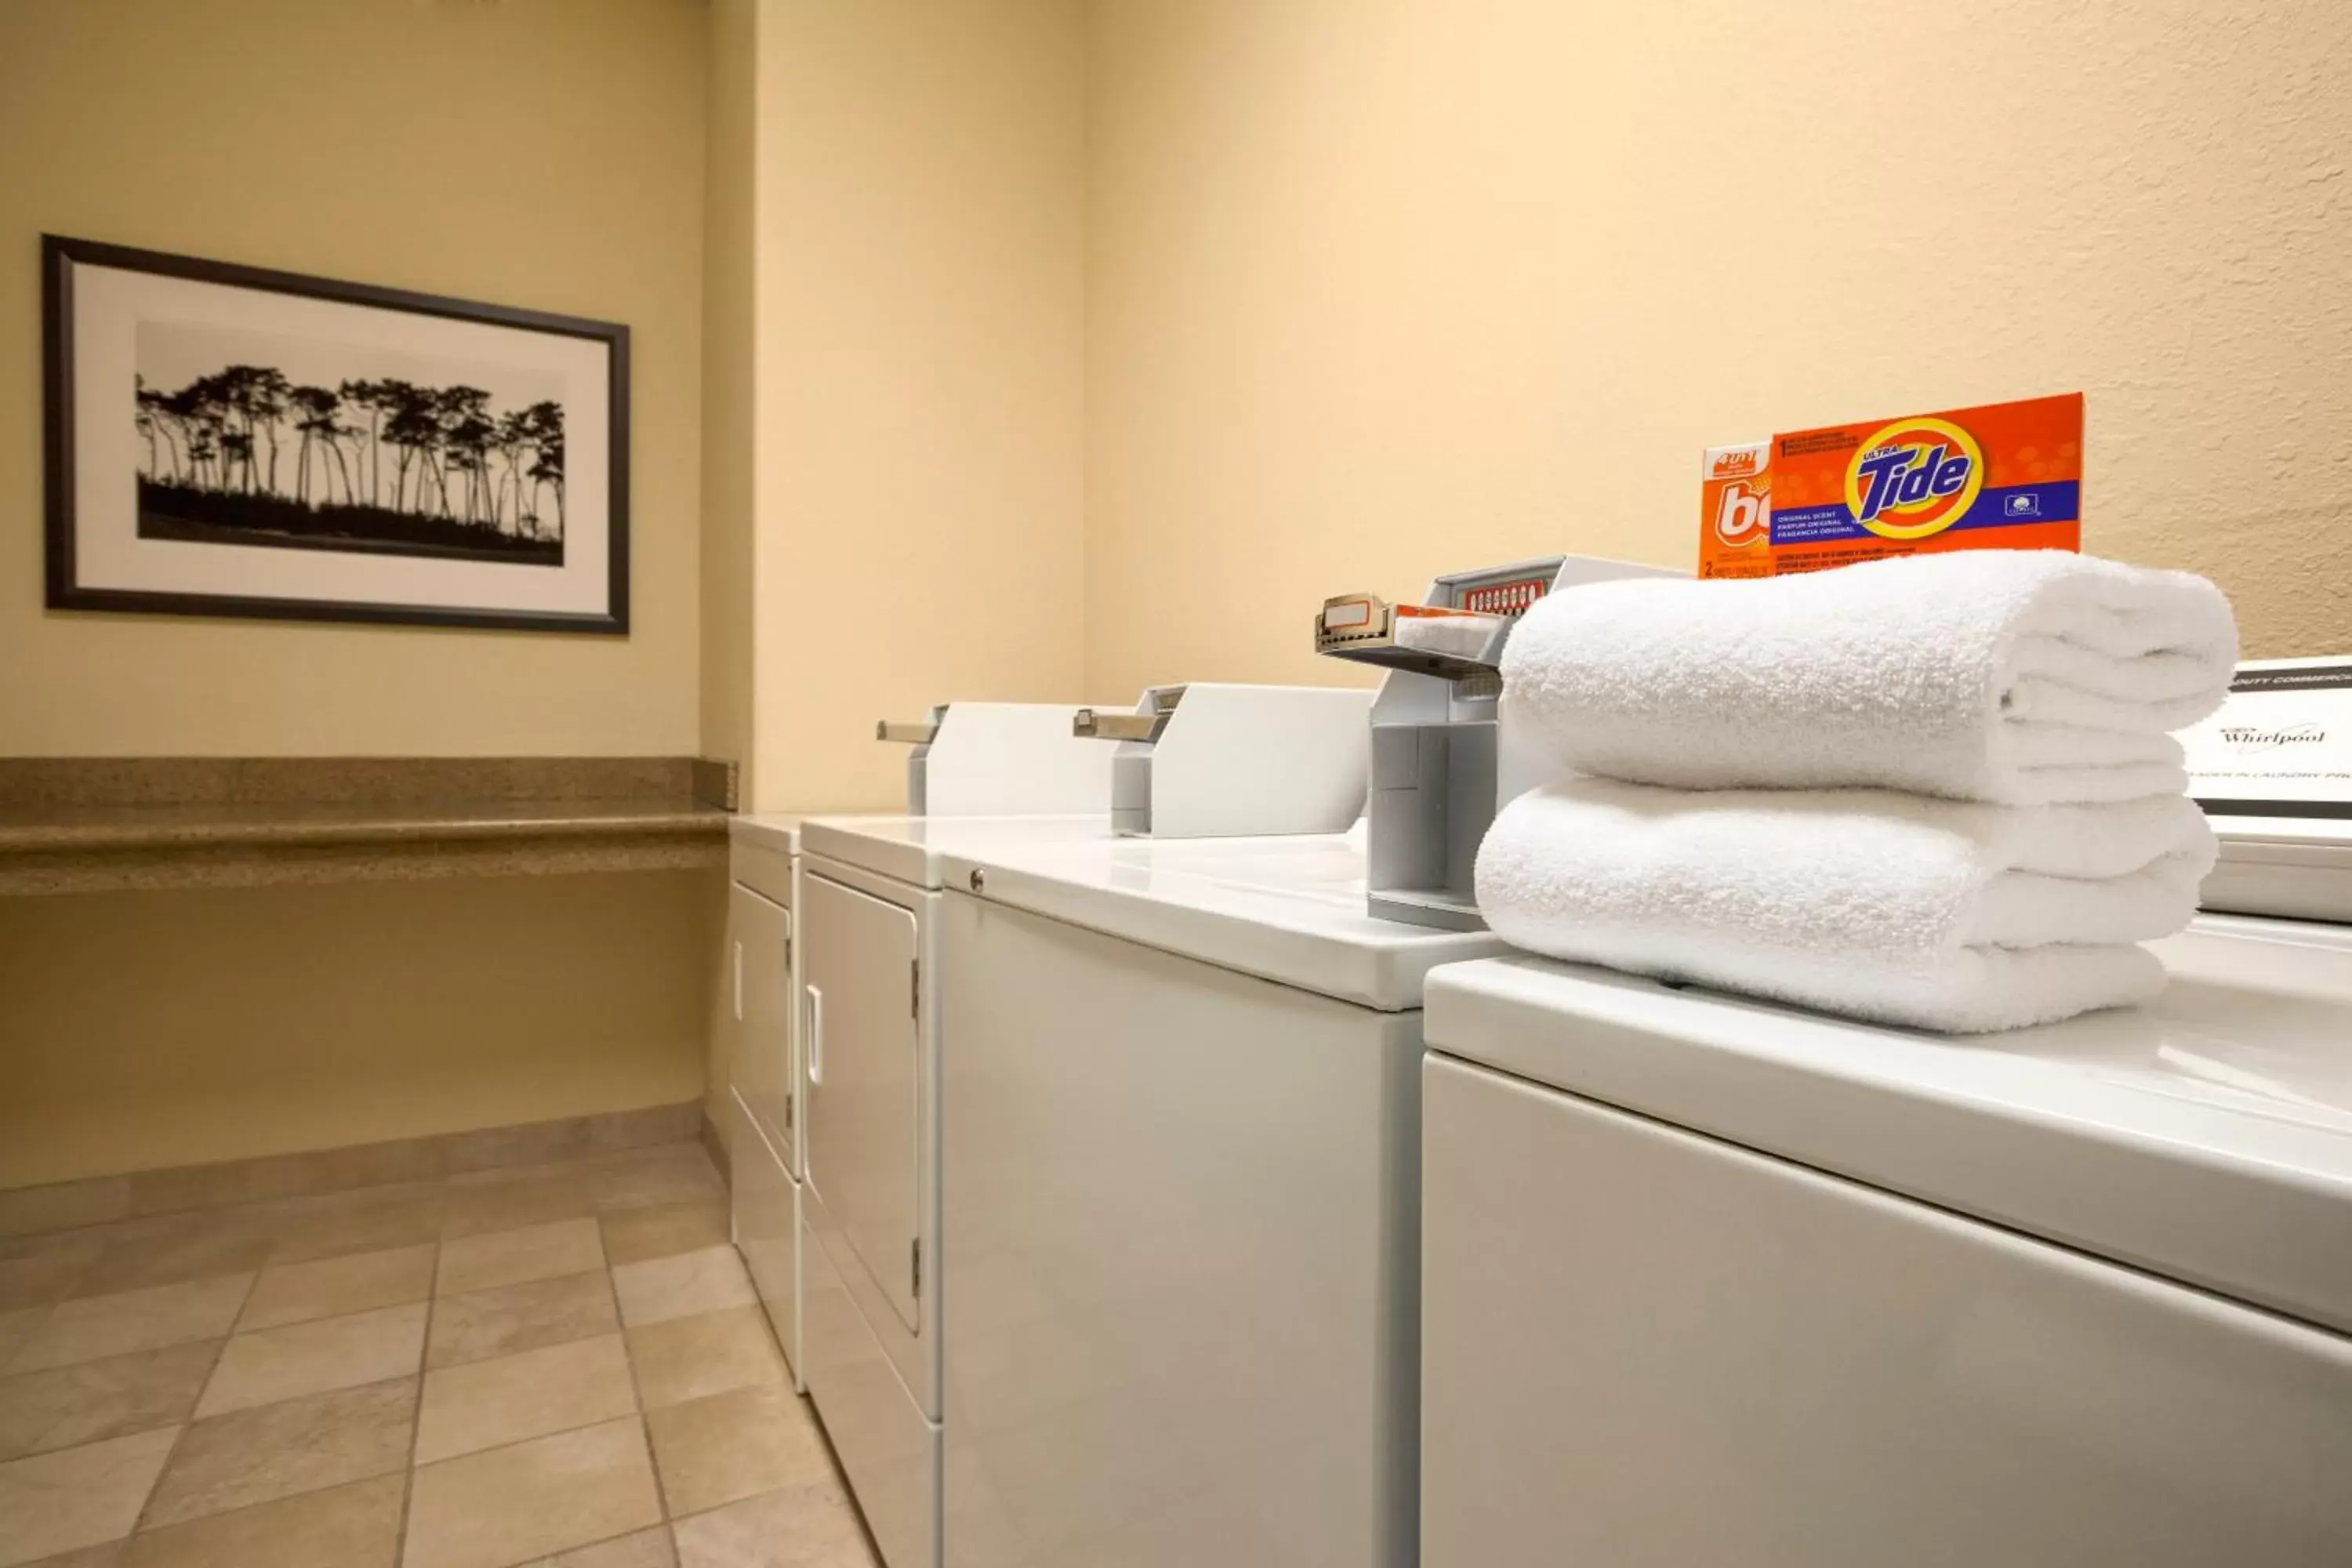 Area and facilities in Country Inn & Suites by Radisson, Tucson City Center, AZ